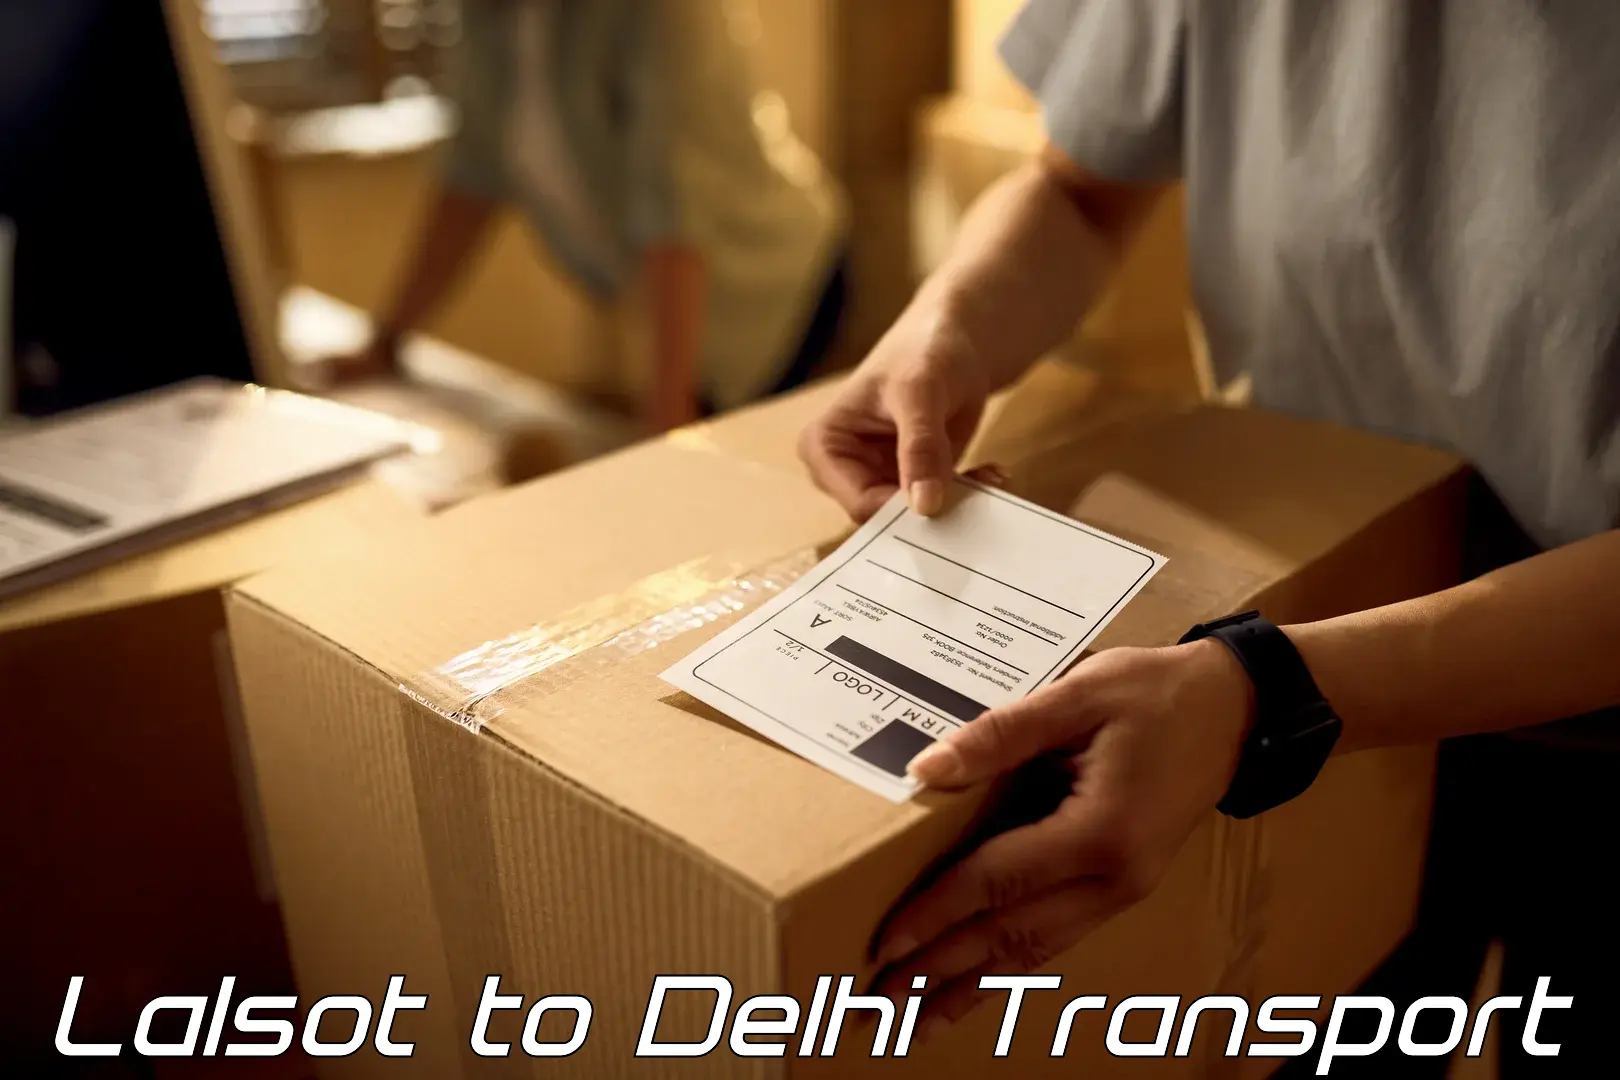 Transport bike from one state to another Lalsot to University of Delhi